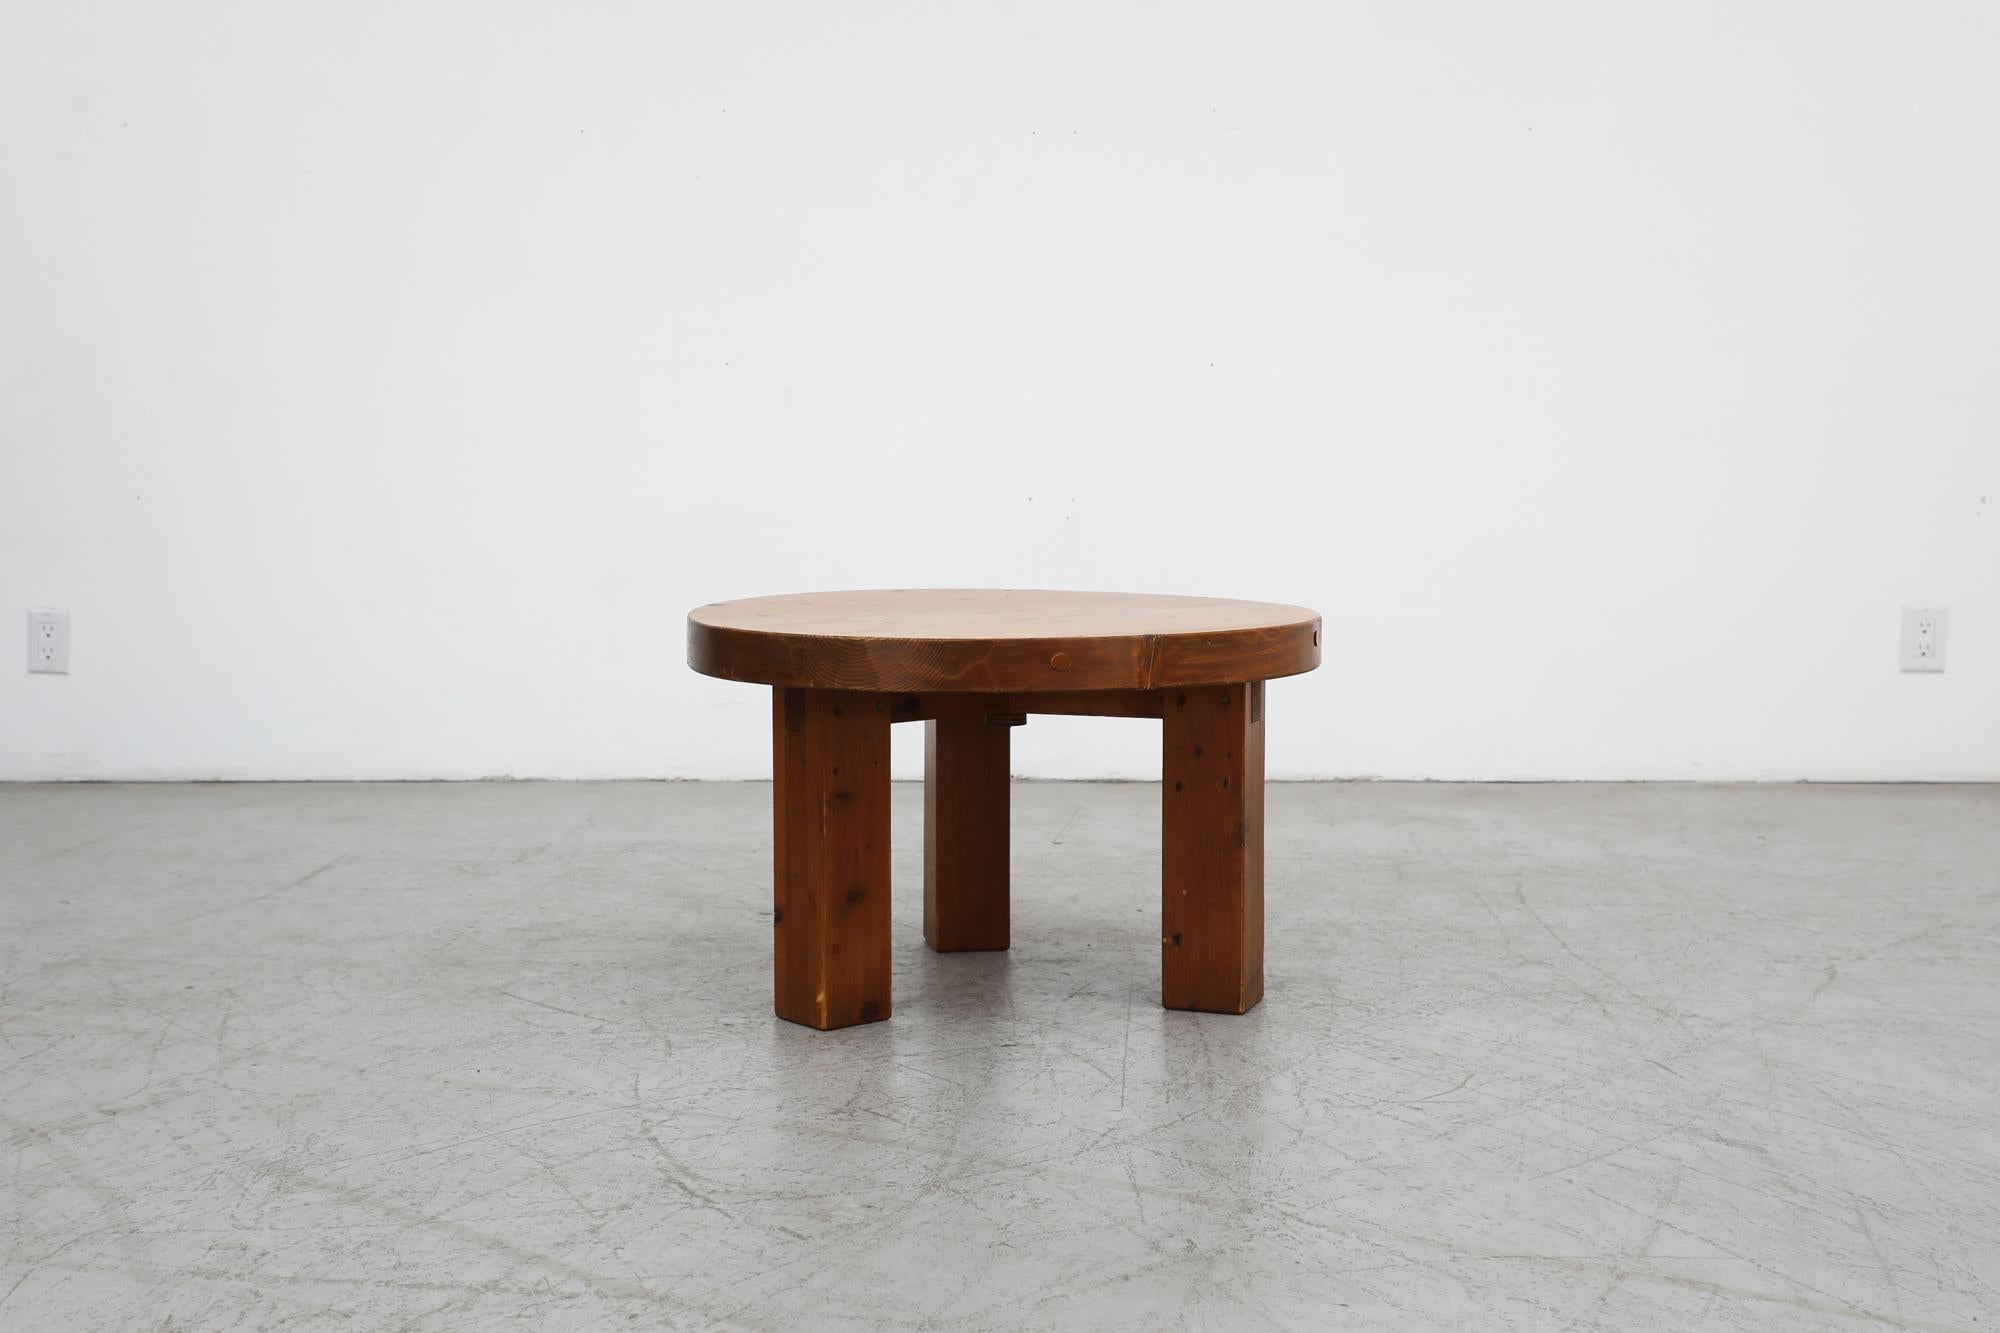 Pierre Chapo Inspired Heavy Pine Brutalist Side Table w/ Round Top & Square Legs For Sale 8